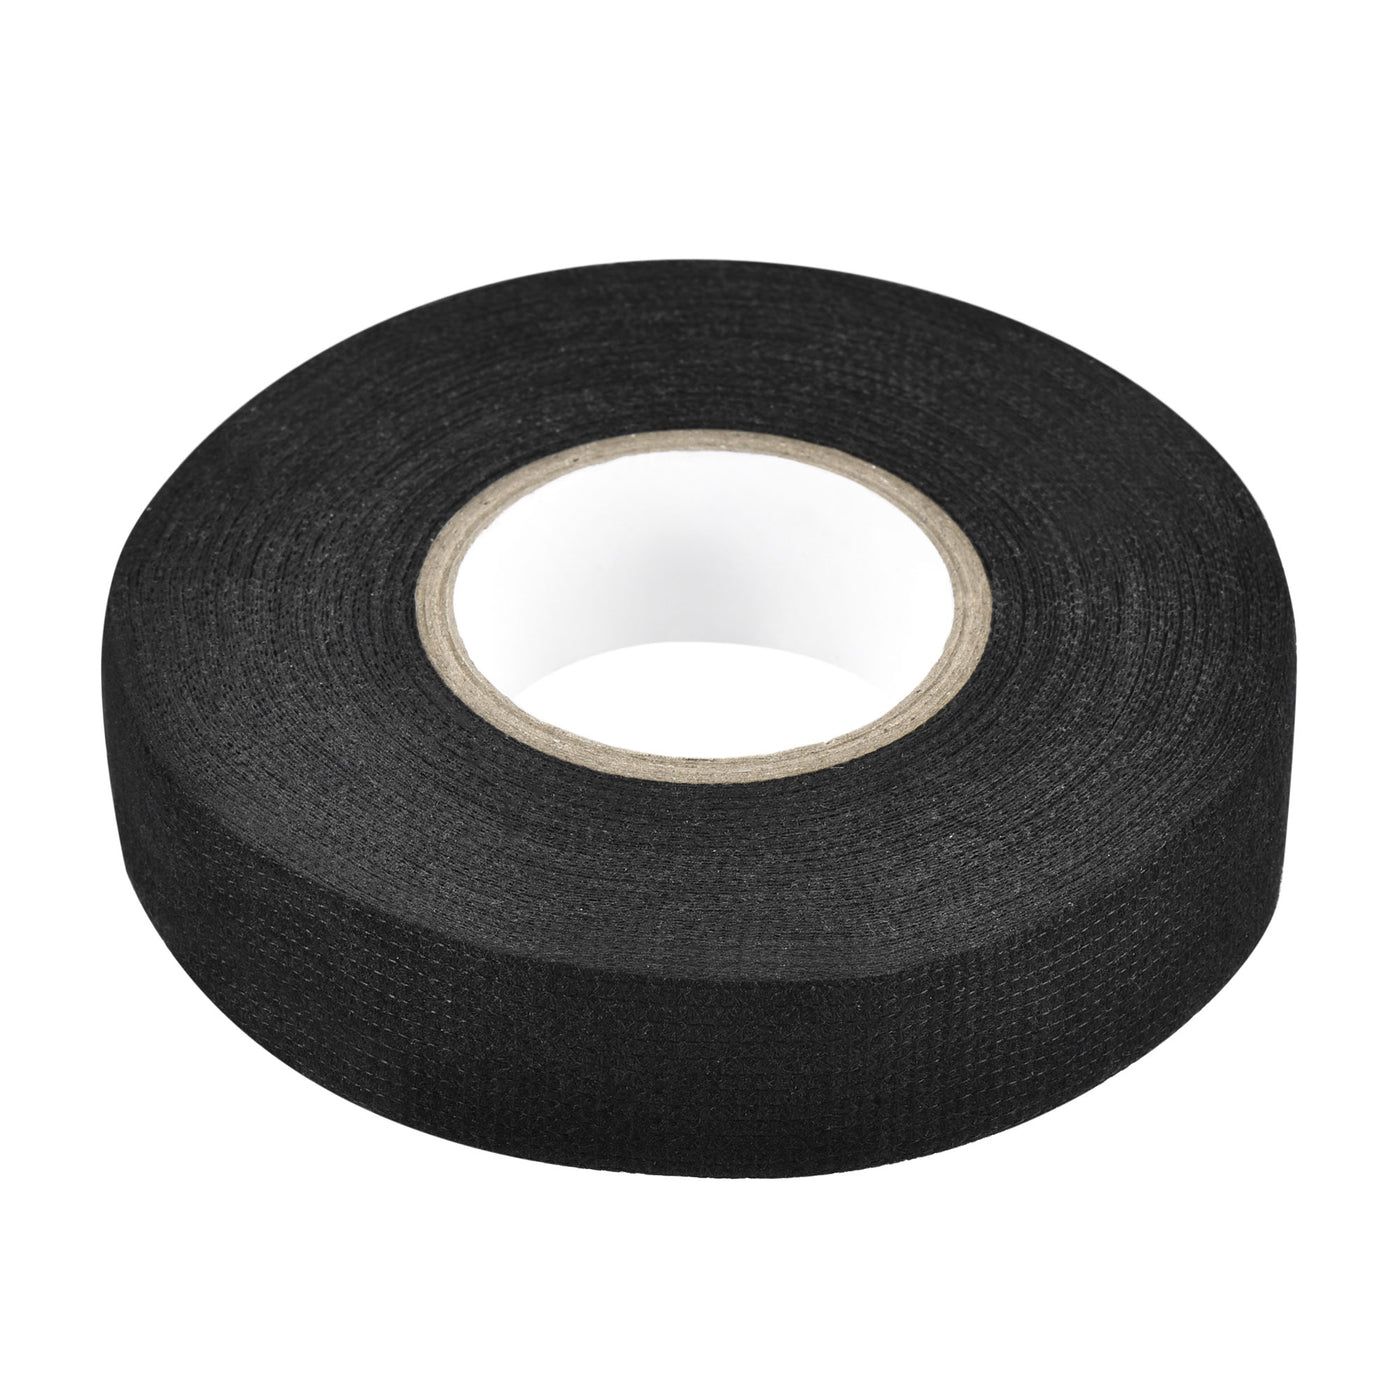 uxcell Uxcell Adhesive Cloth Fabric Tape Wire Harness Looms Single-Side 19mm x 15m Black 2 Pcs